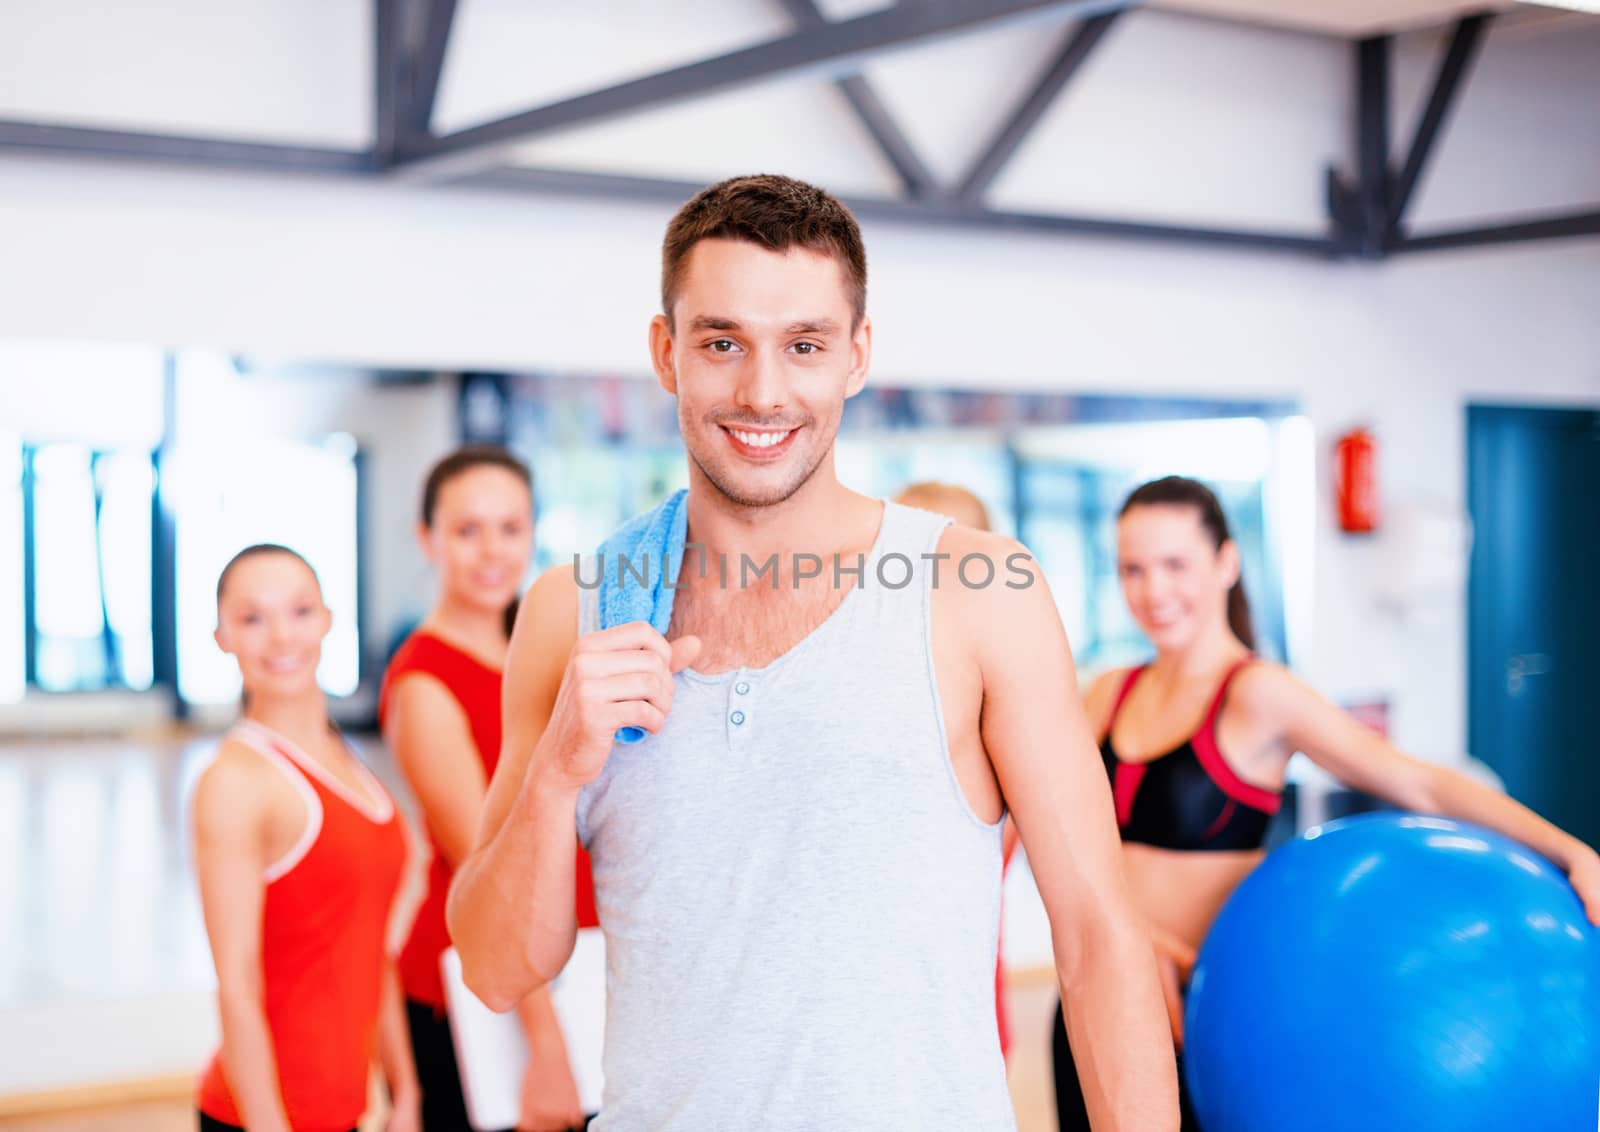 fitness, sport, training, gym and lifestyle concept - smiling man standing in front of the group of people in gym